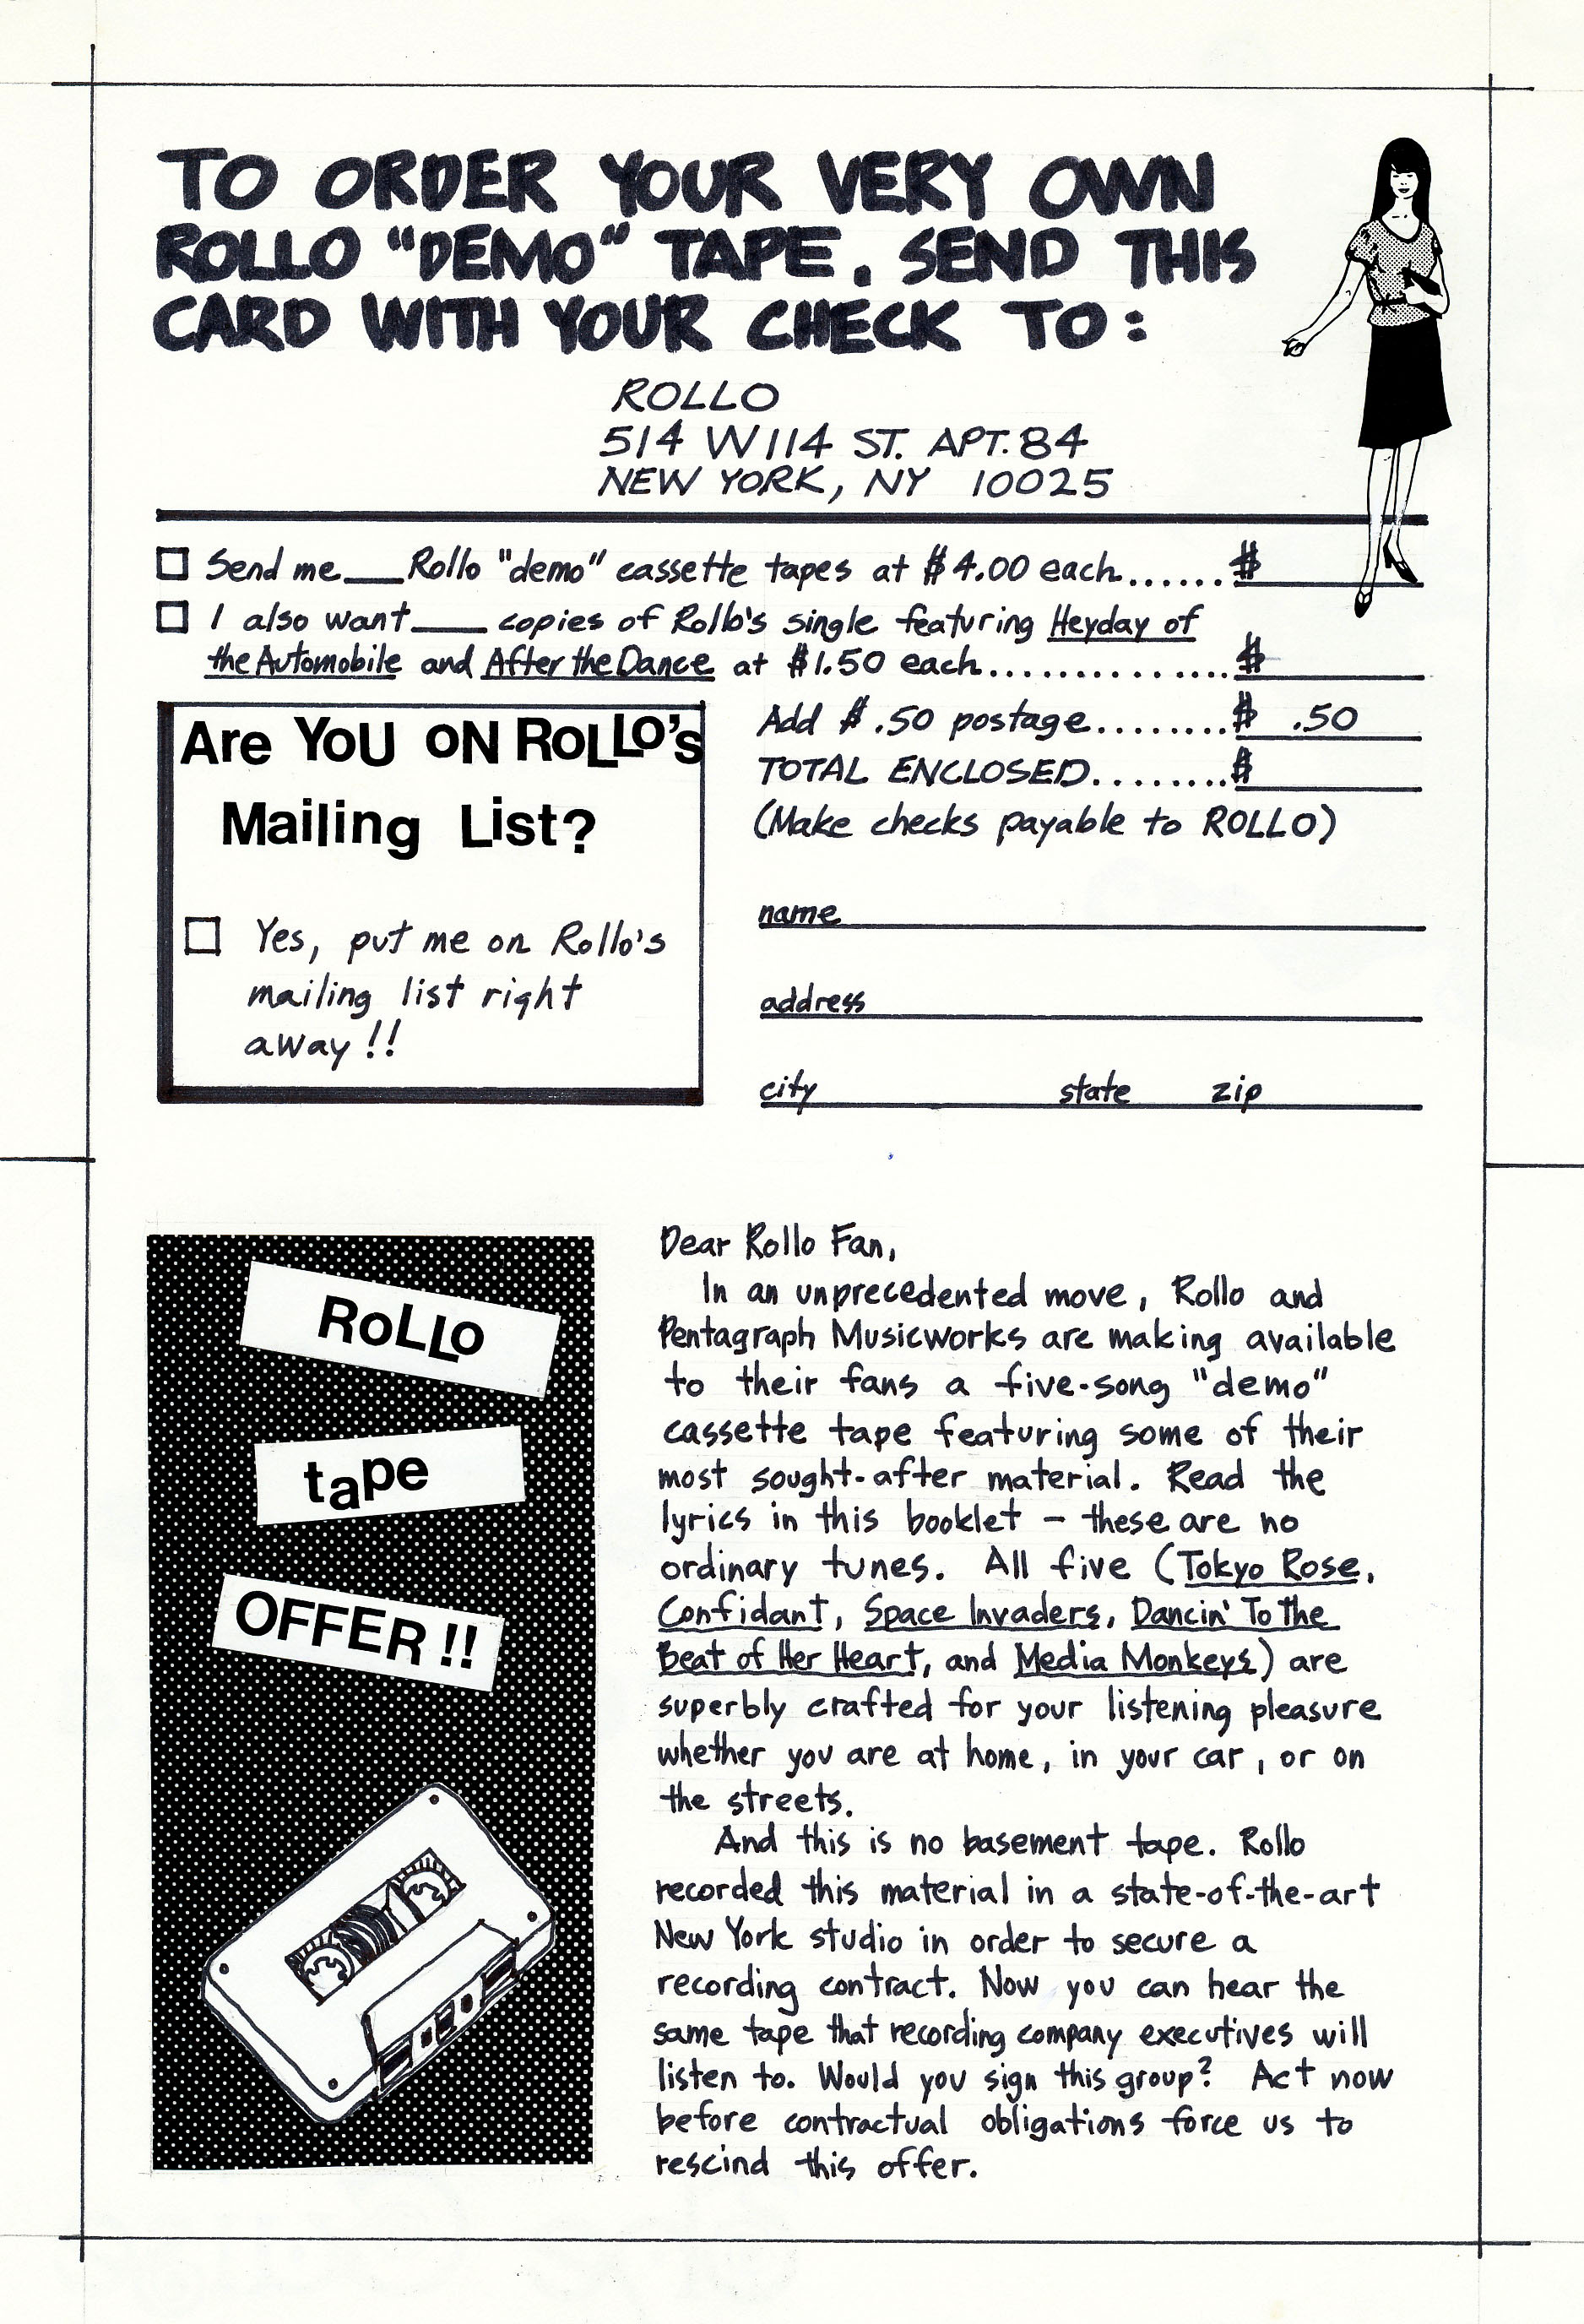 Rollo postcard for demo tape and Heyday record (undated)